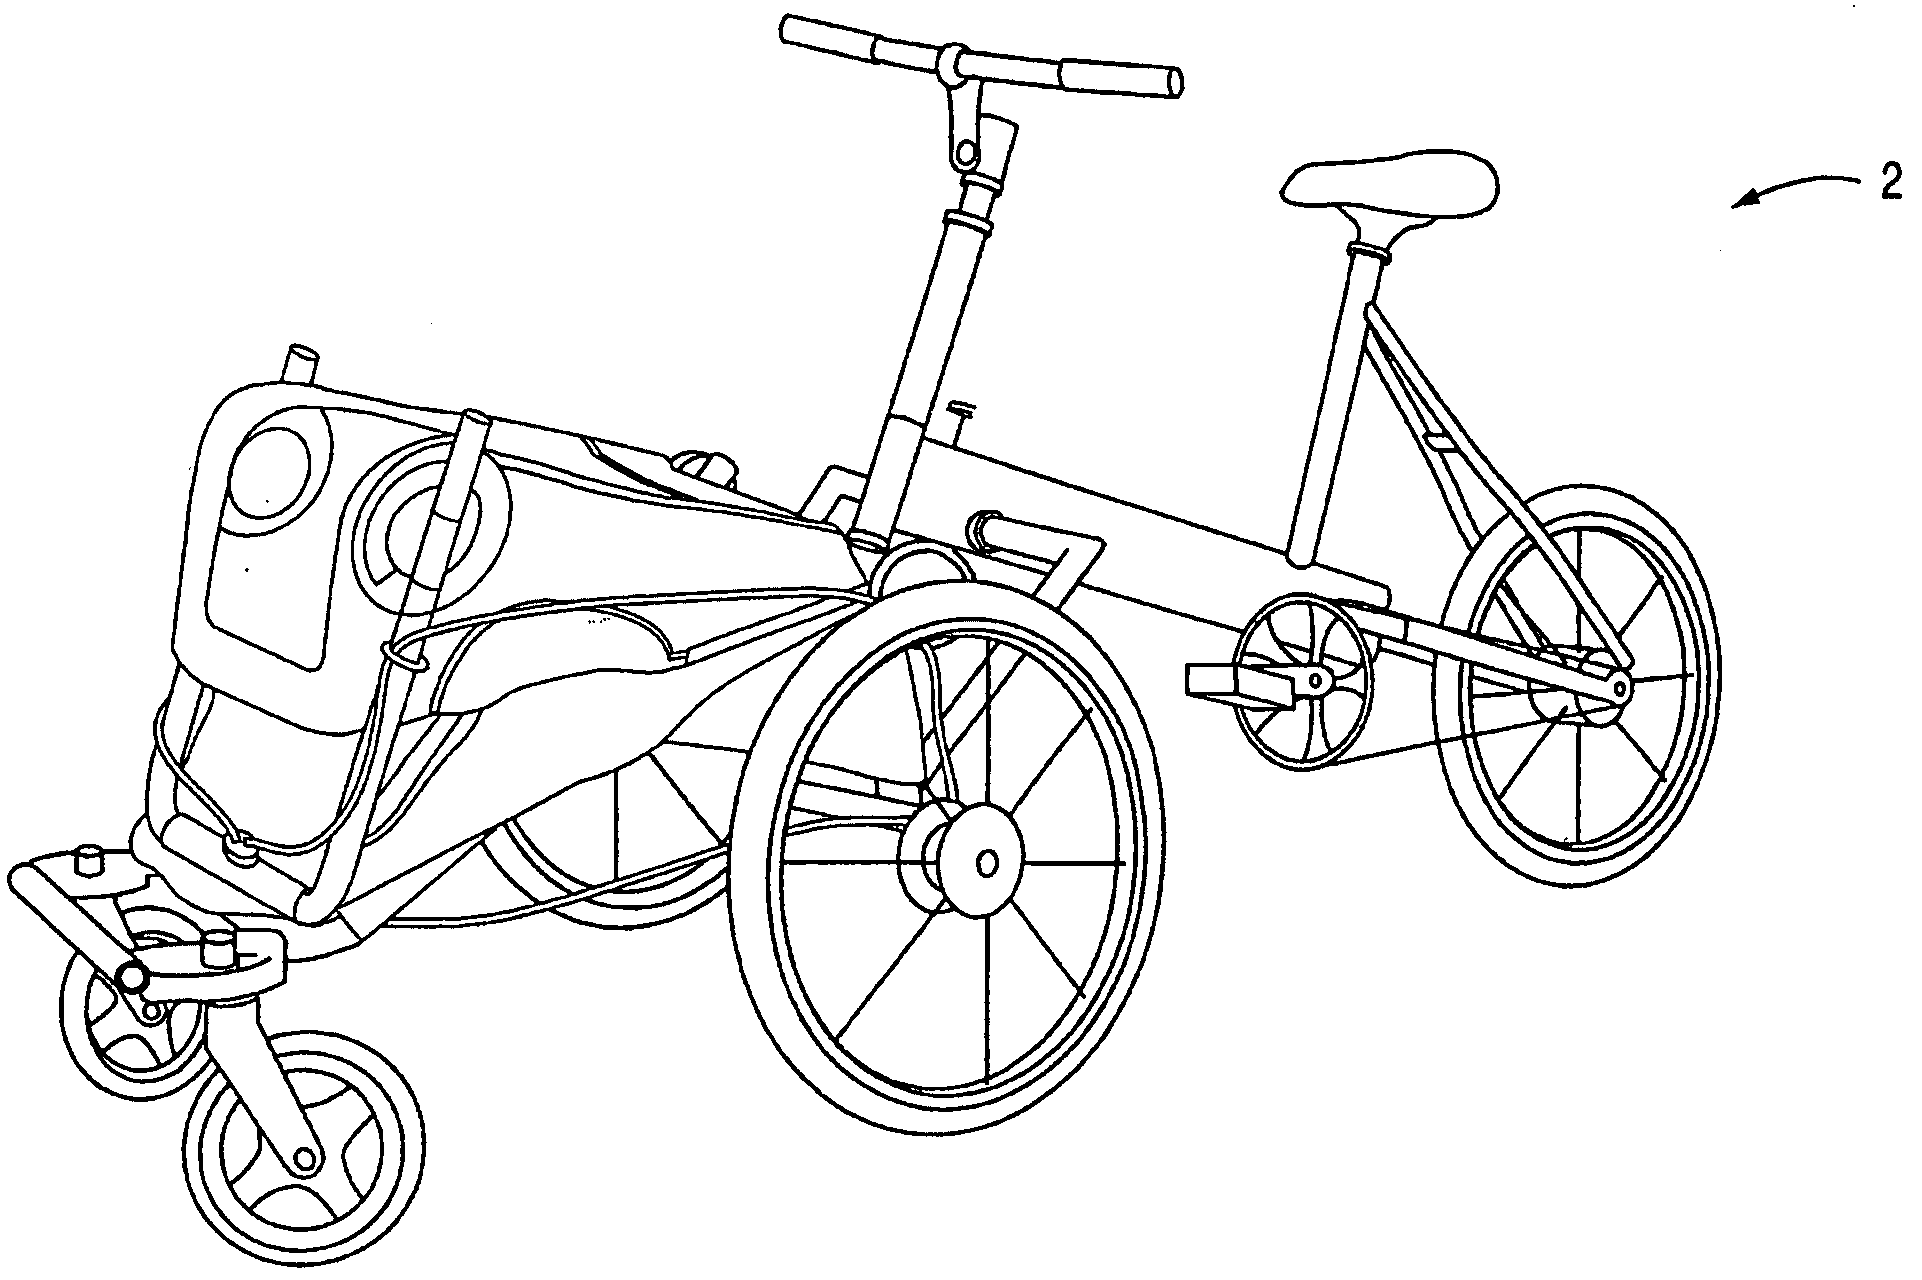 Convertible stroller-cycle